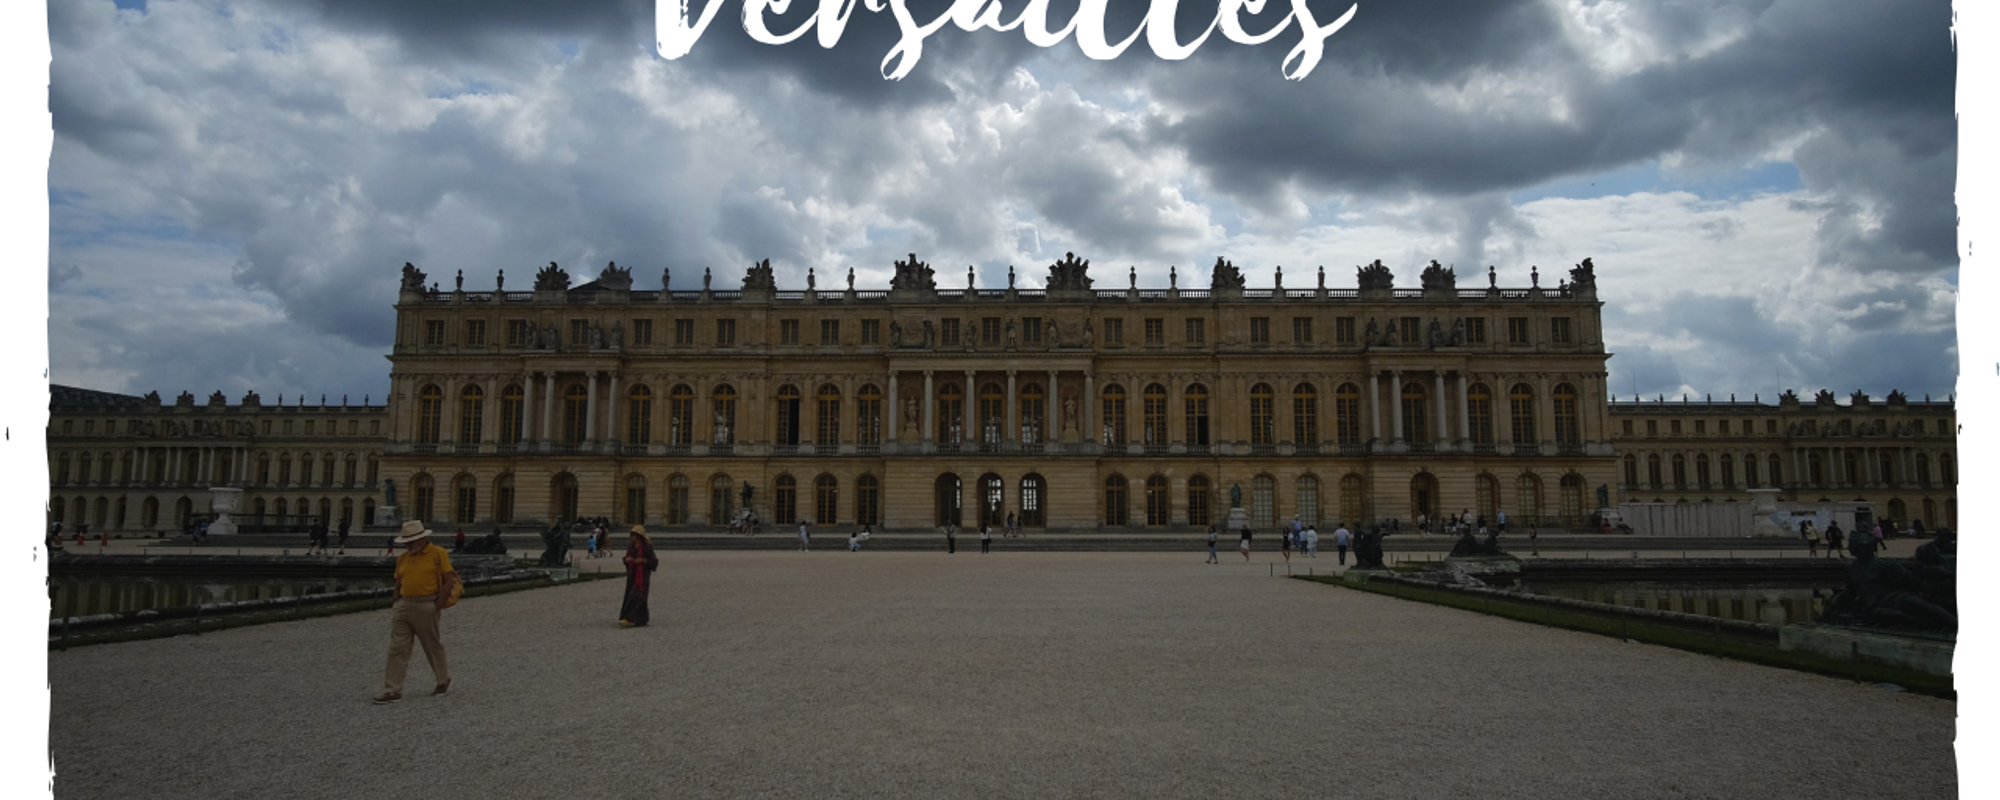 The Palace of Versailles – A French story